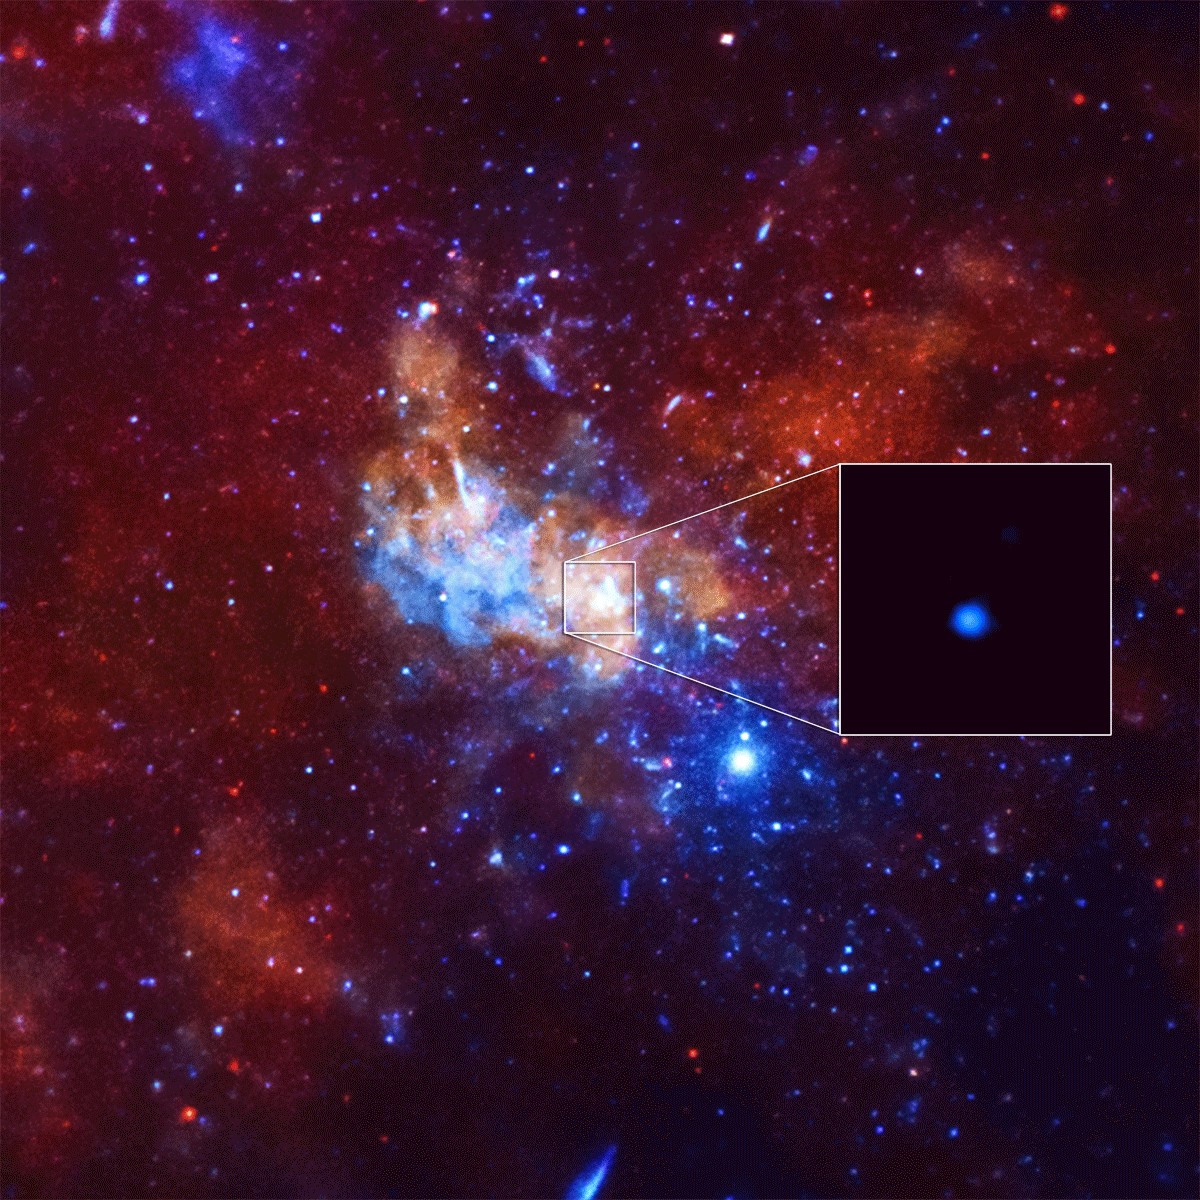 A composite image of the area around the supermassive black hole at the center of the Milky Way, known as Sagittarius A* (Sgr A*), taken with NASA's Chandra X-ray space telescope. The colors in the main image represent medium, and high-energy X-rays as red, green, and blue respectively. The inset box shows a giant X-ray flare that has been recently detected very close to the black hole, along with a much steadier X-ray emission from a nearby magnetar. Image Credit: NASA/CXC/Northwestern Univ/D.Haggard et al